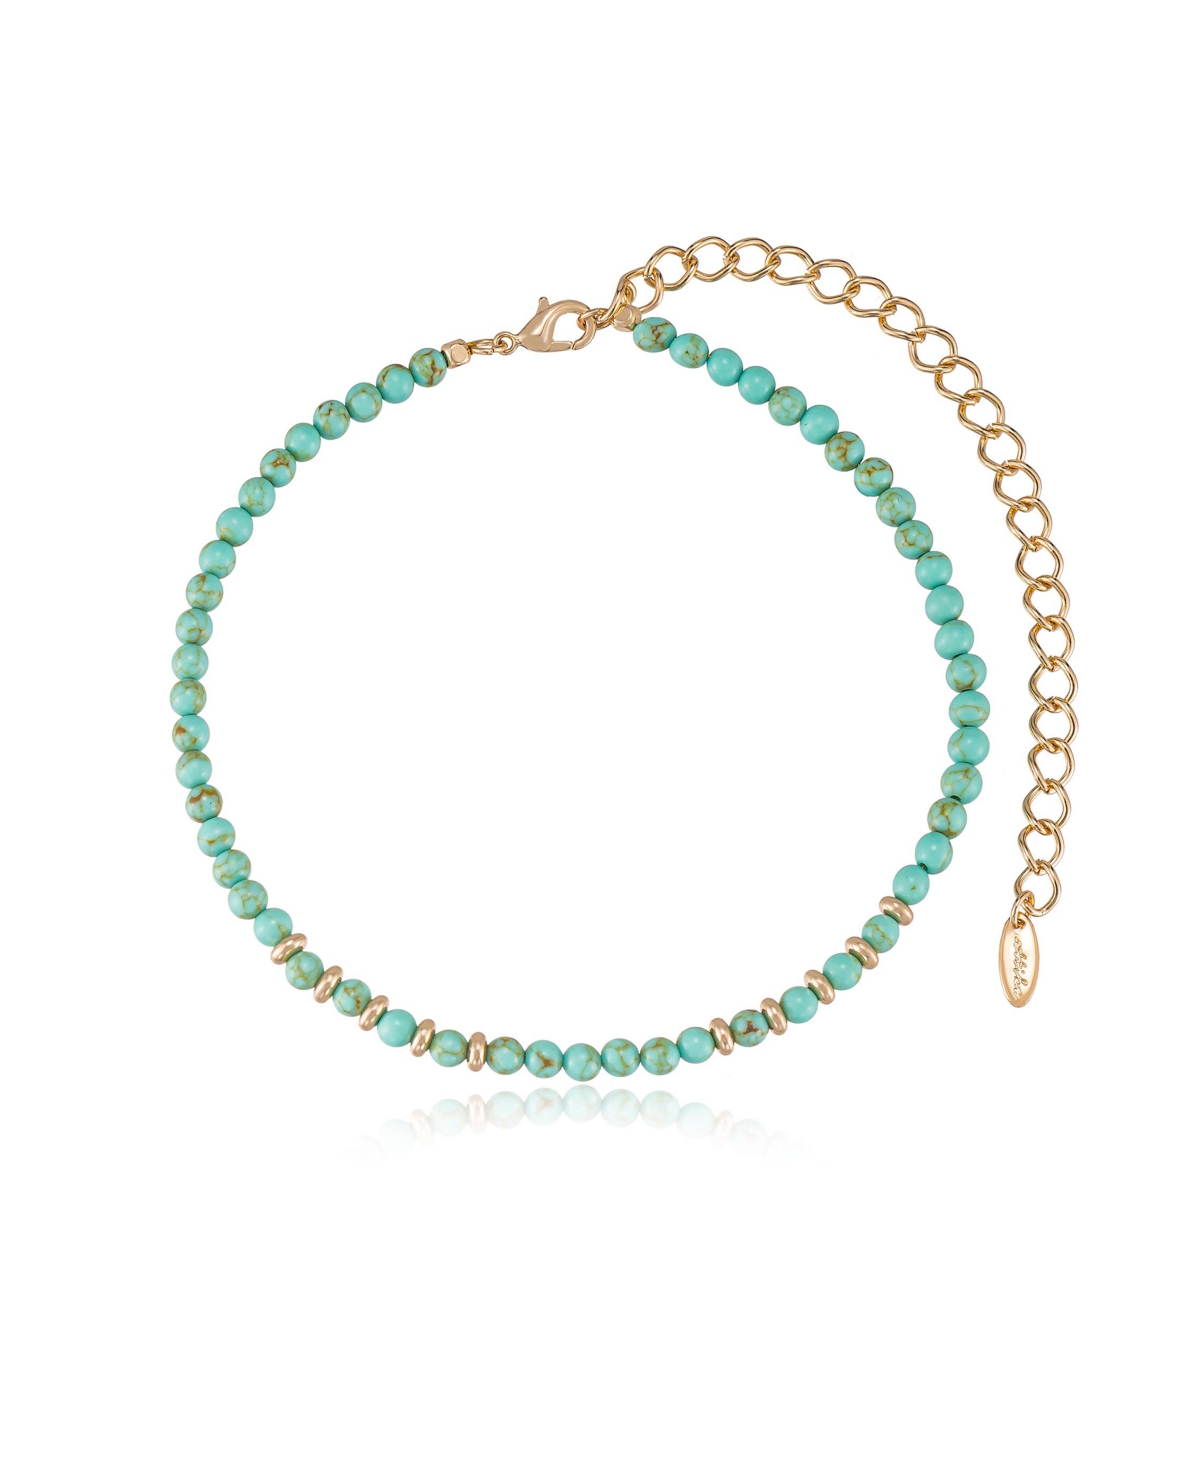 Surprise 18k Gold Plated Necklace - Turquoise